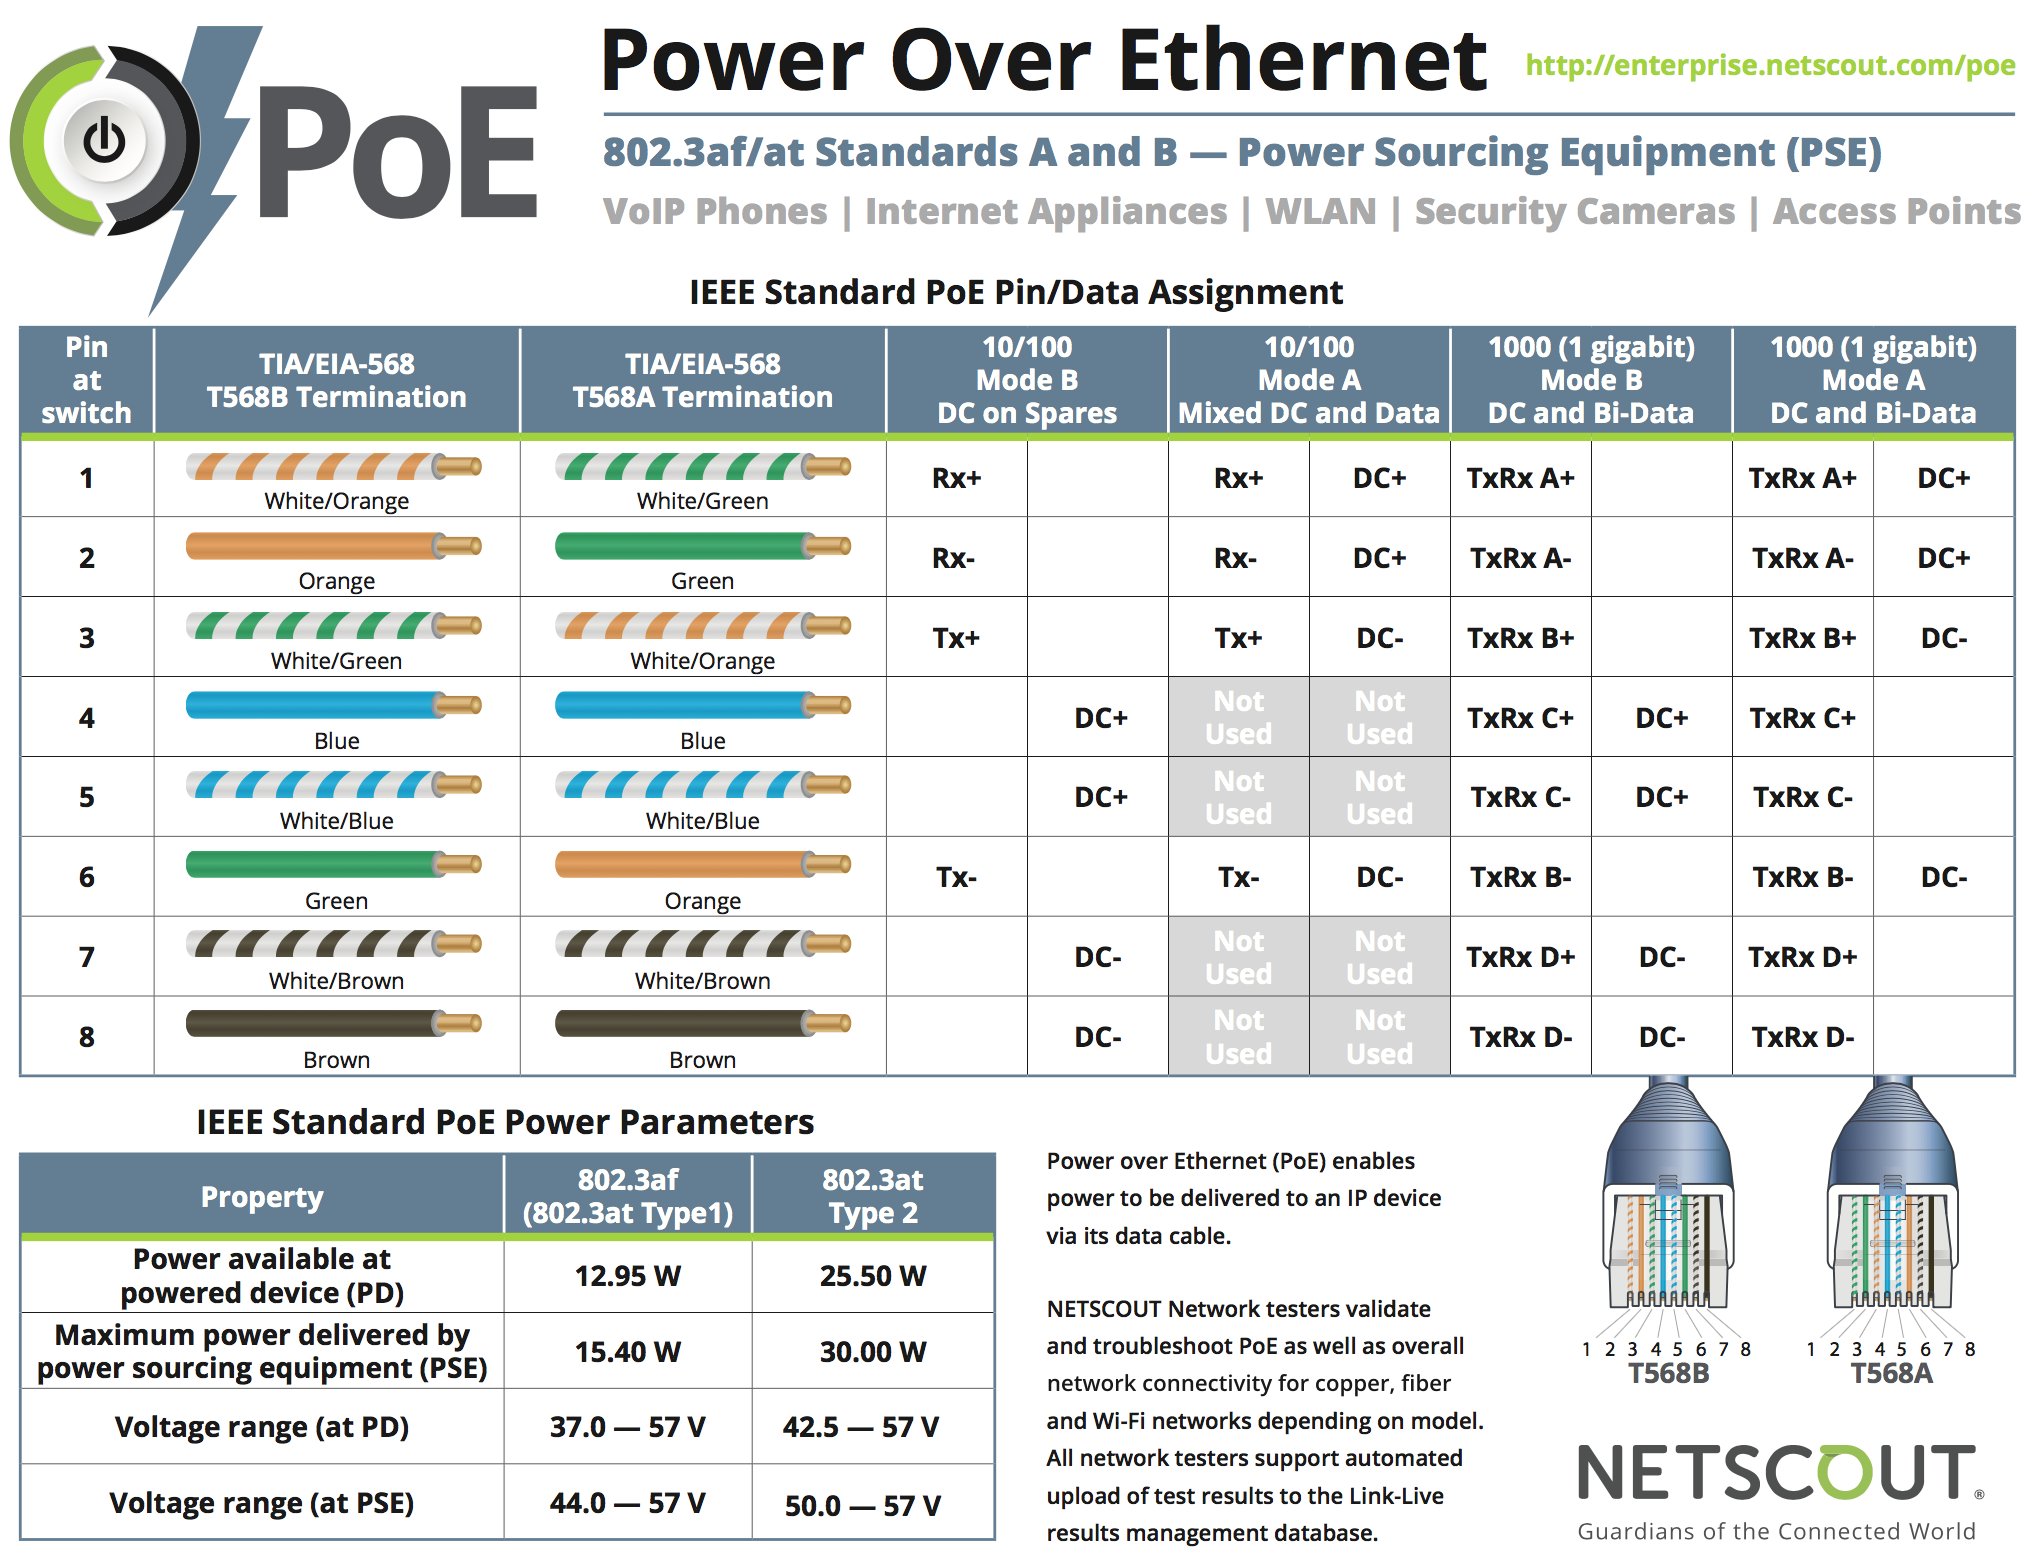 Keith R. Parsons on Twitter: "Very useful PoE chart from NetScout with